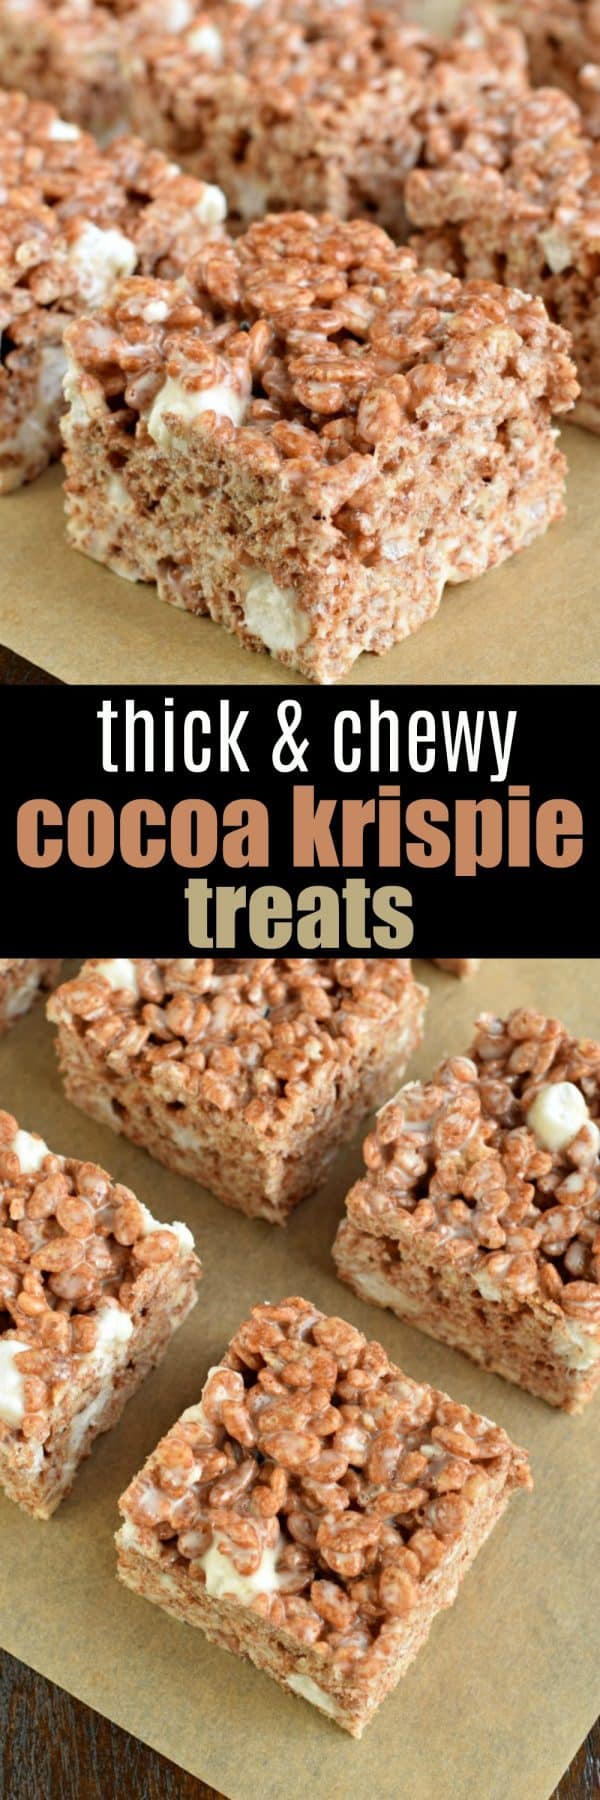 Thick and Chewy Chocolate Krispie Treats Recipe